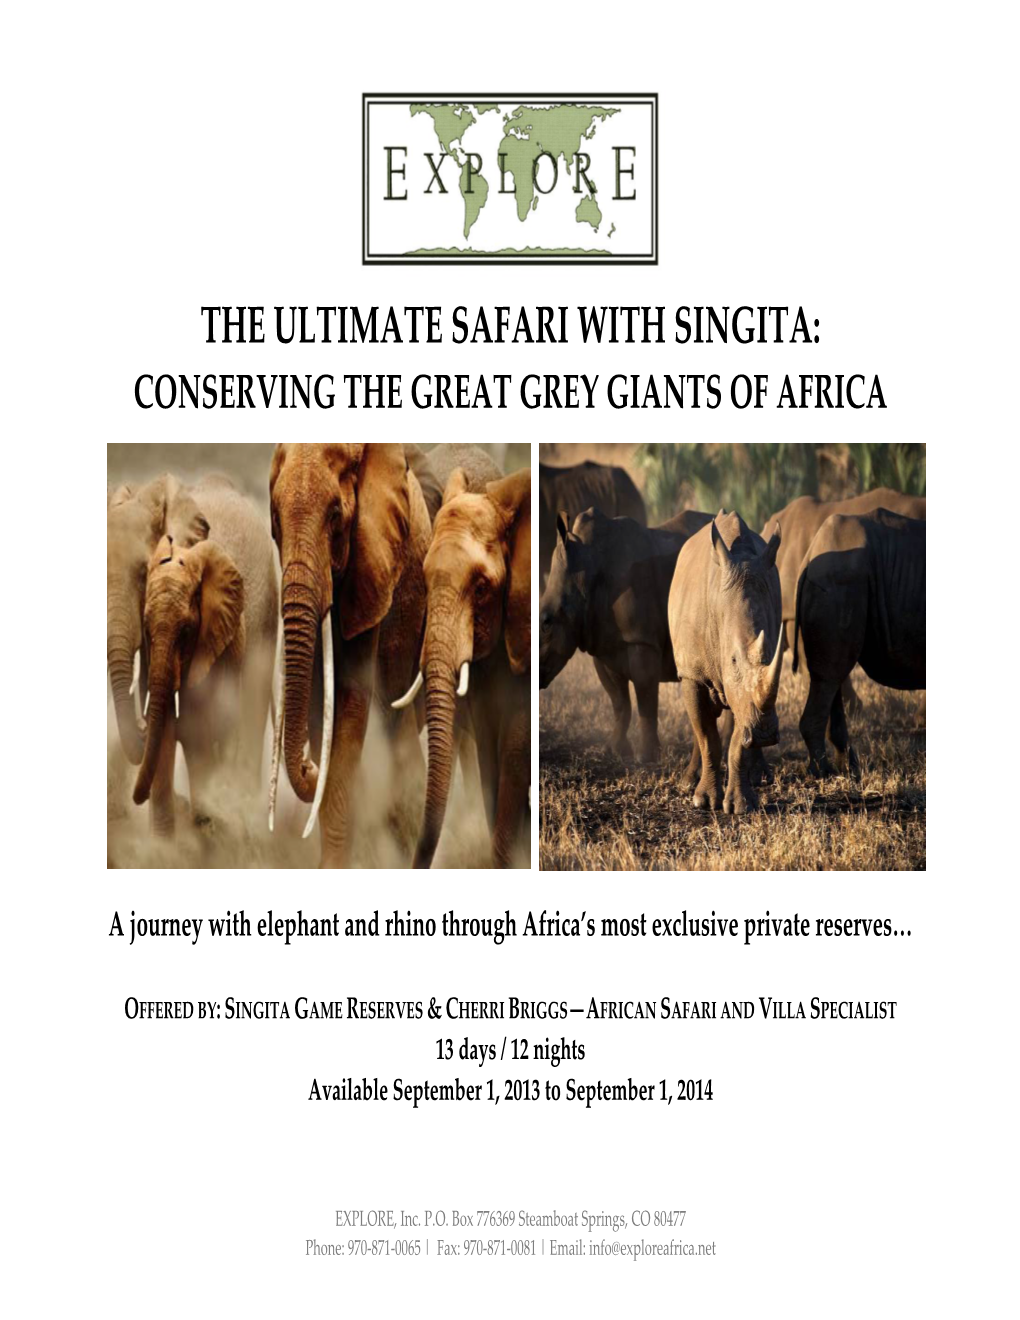 The Ultimate Safari with Singita: Conserving the Great Grey Giants of Africa